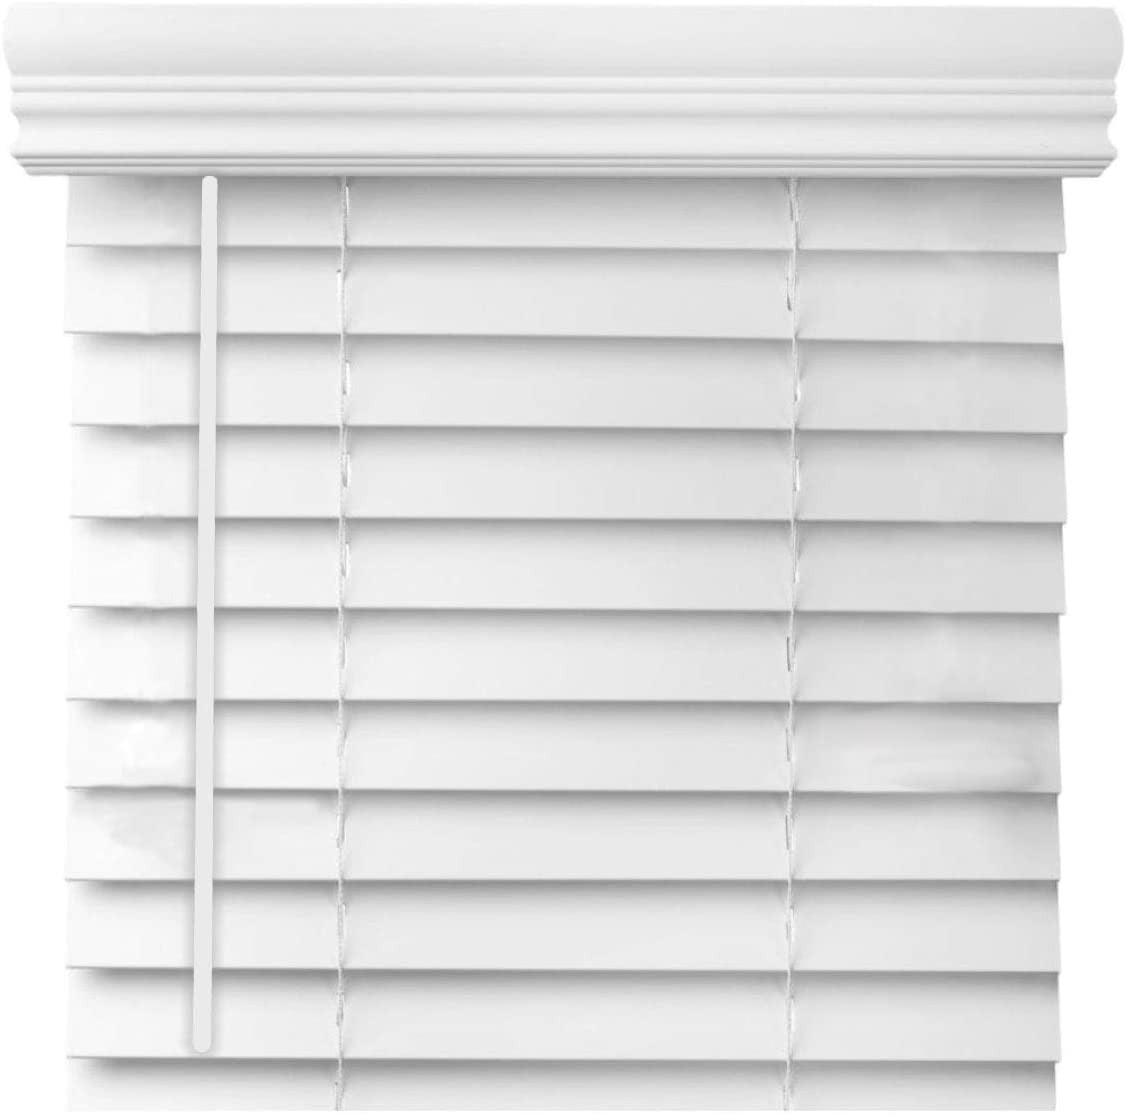 Details about   2 inch Faux Wood Blinds Window Horizontal Covering Oak Multiple Sizes 